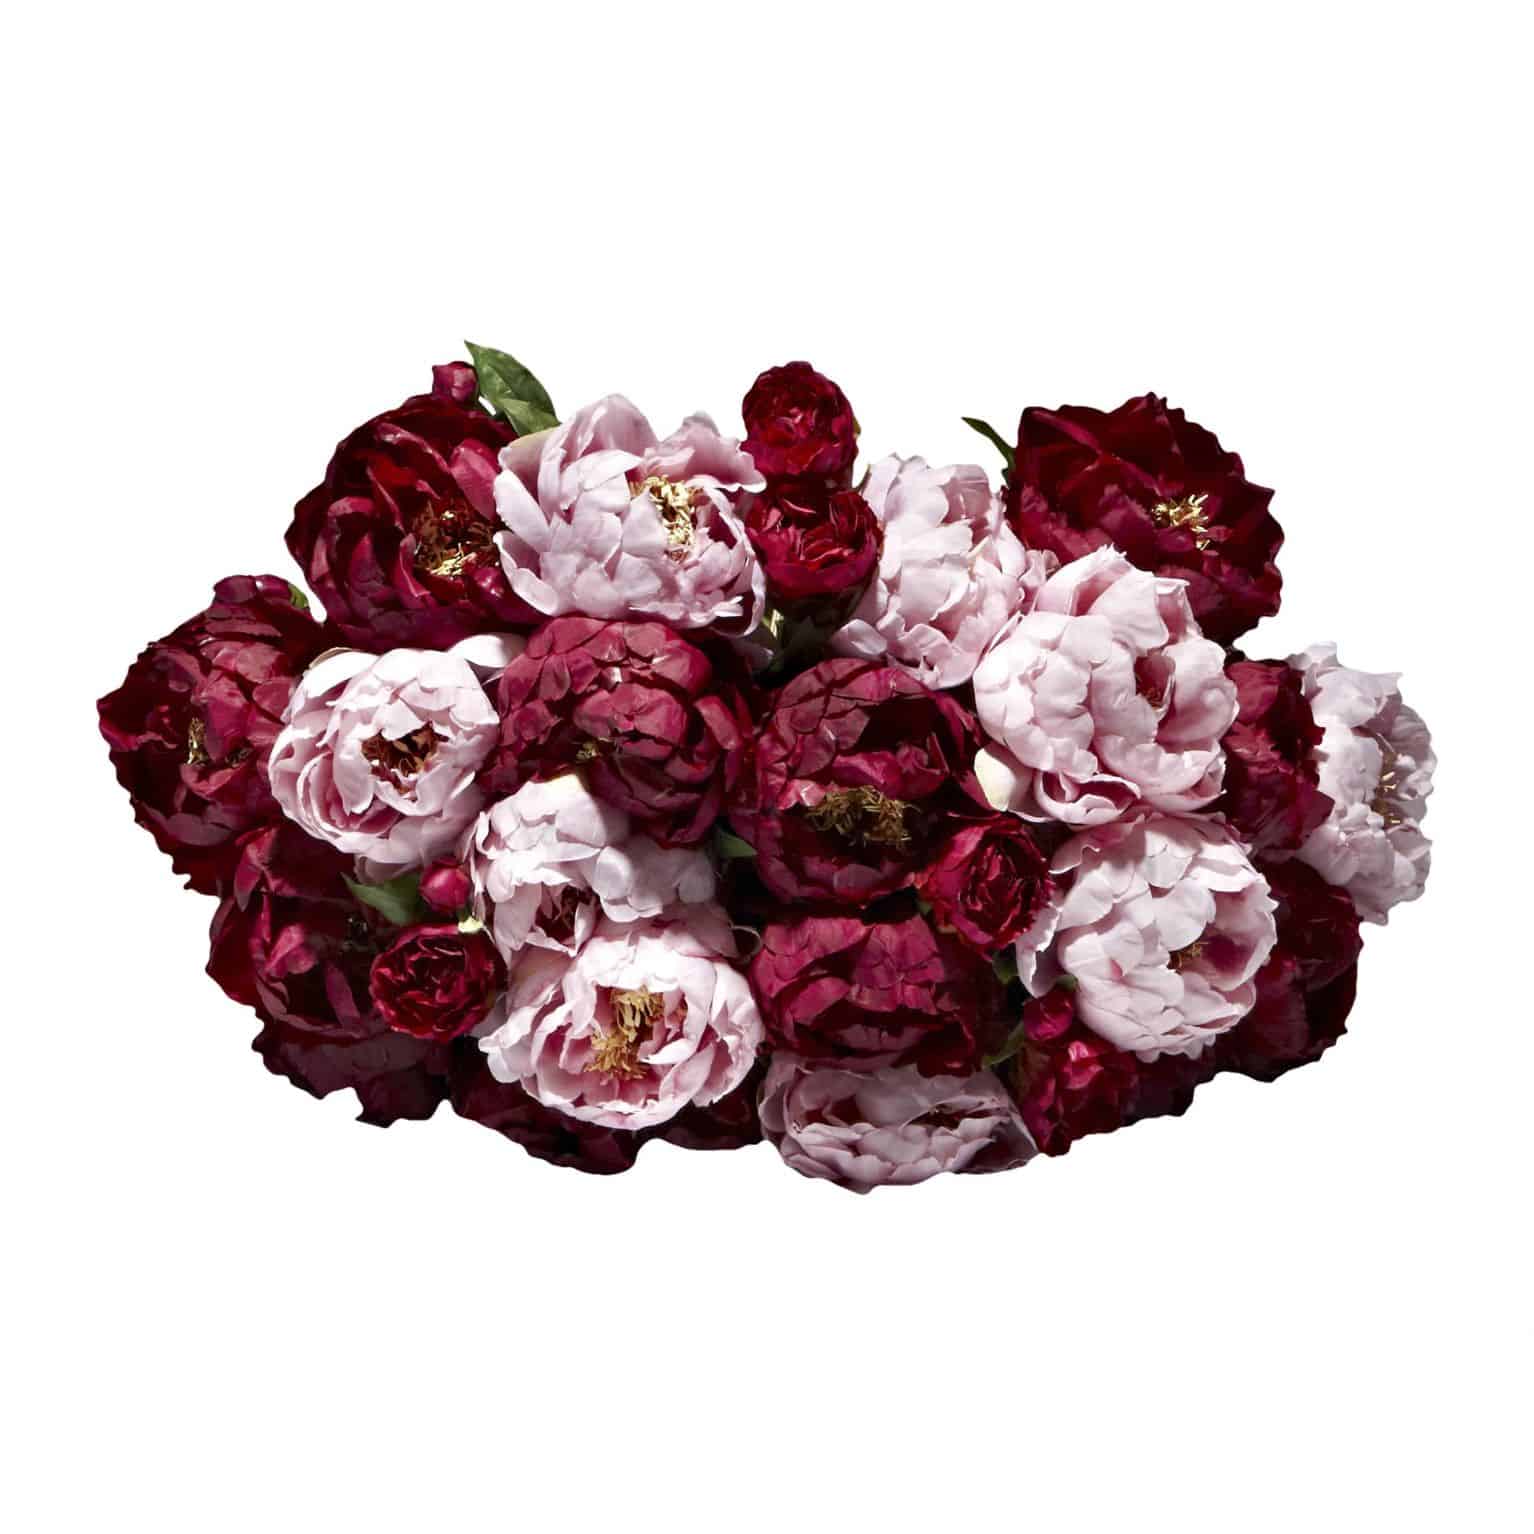 Love our luxurious artificial flower bouquet full of finely detailed large heads on long stem lavender pink and rich silk flower burgundy peonies and buds.